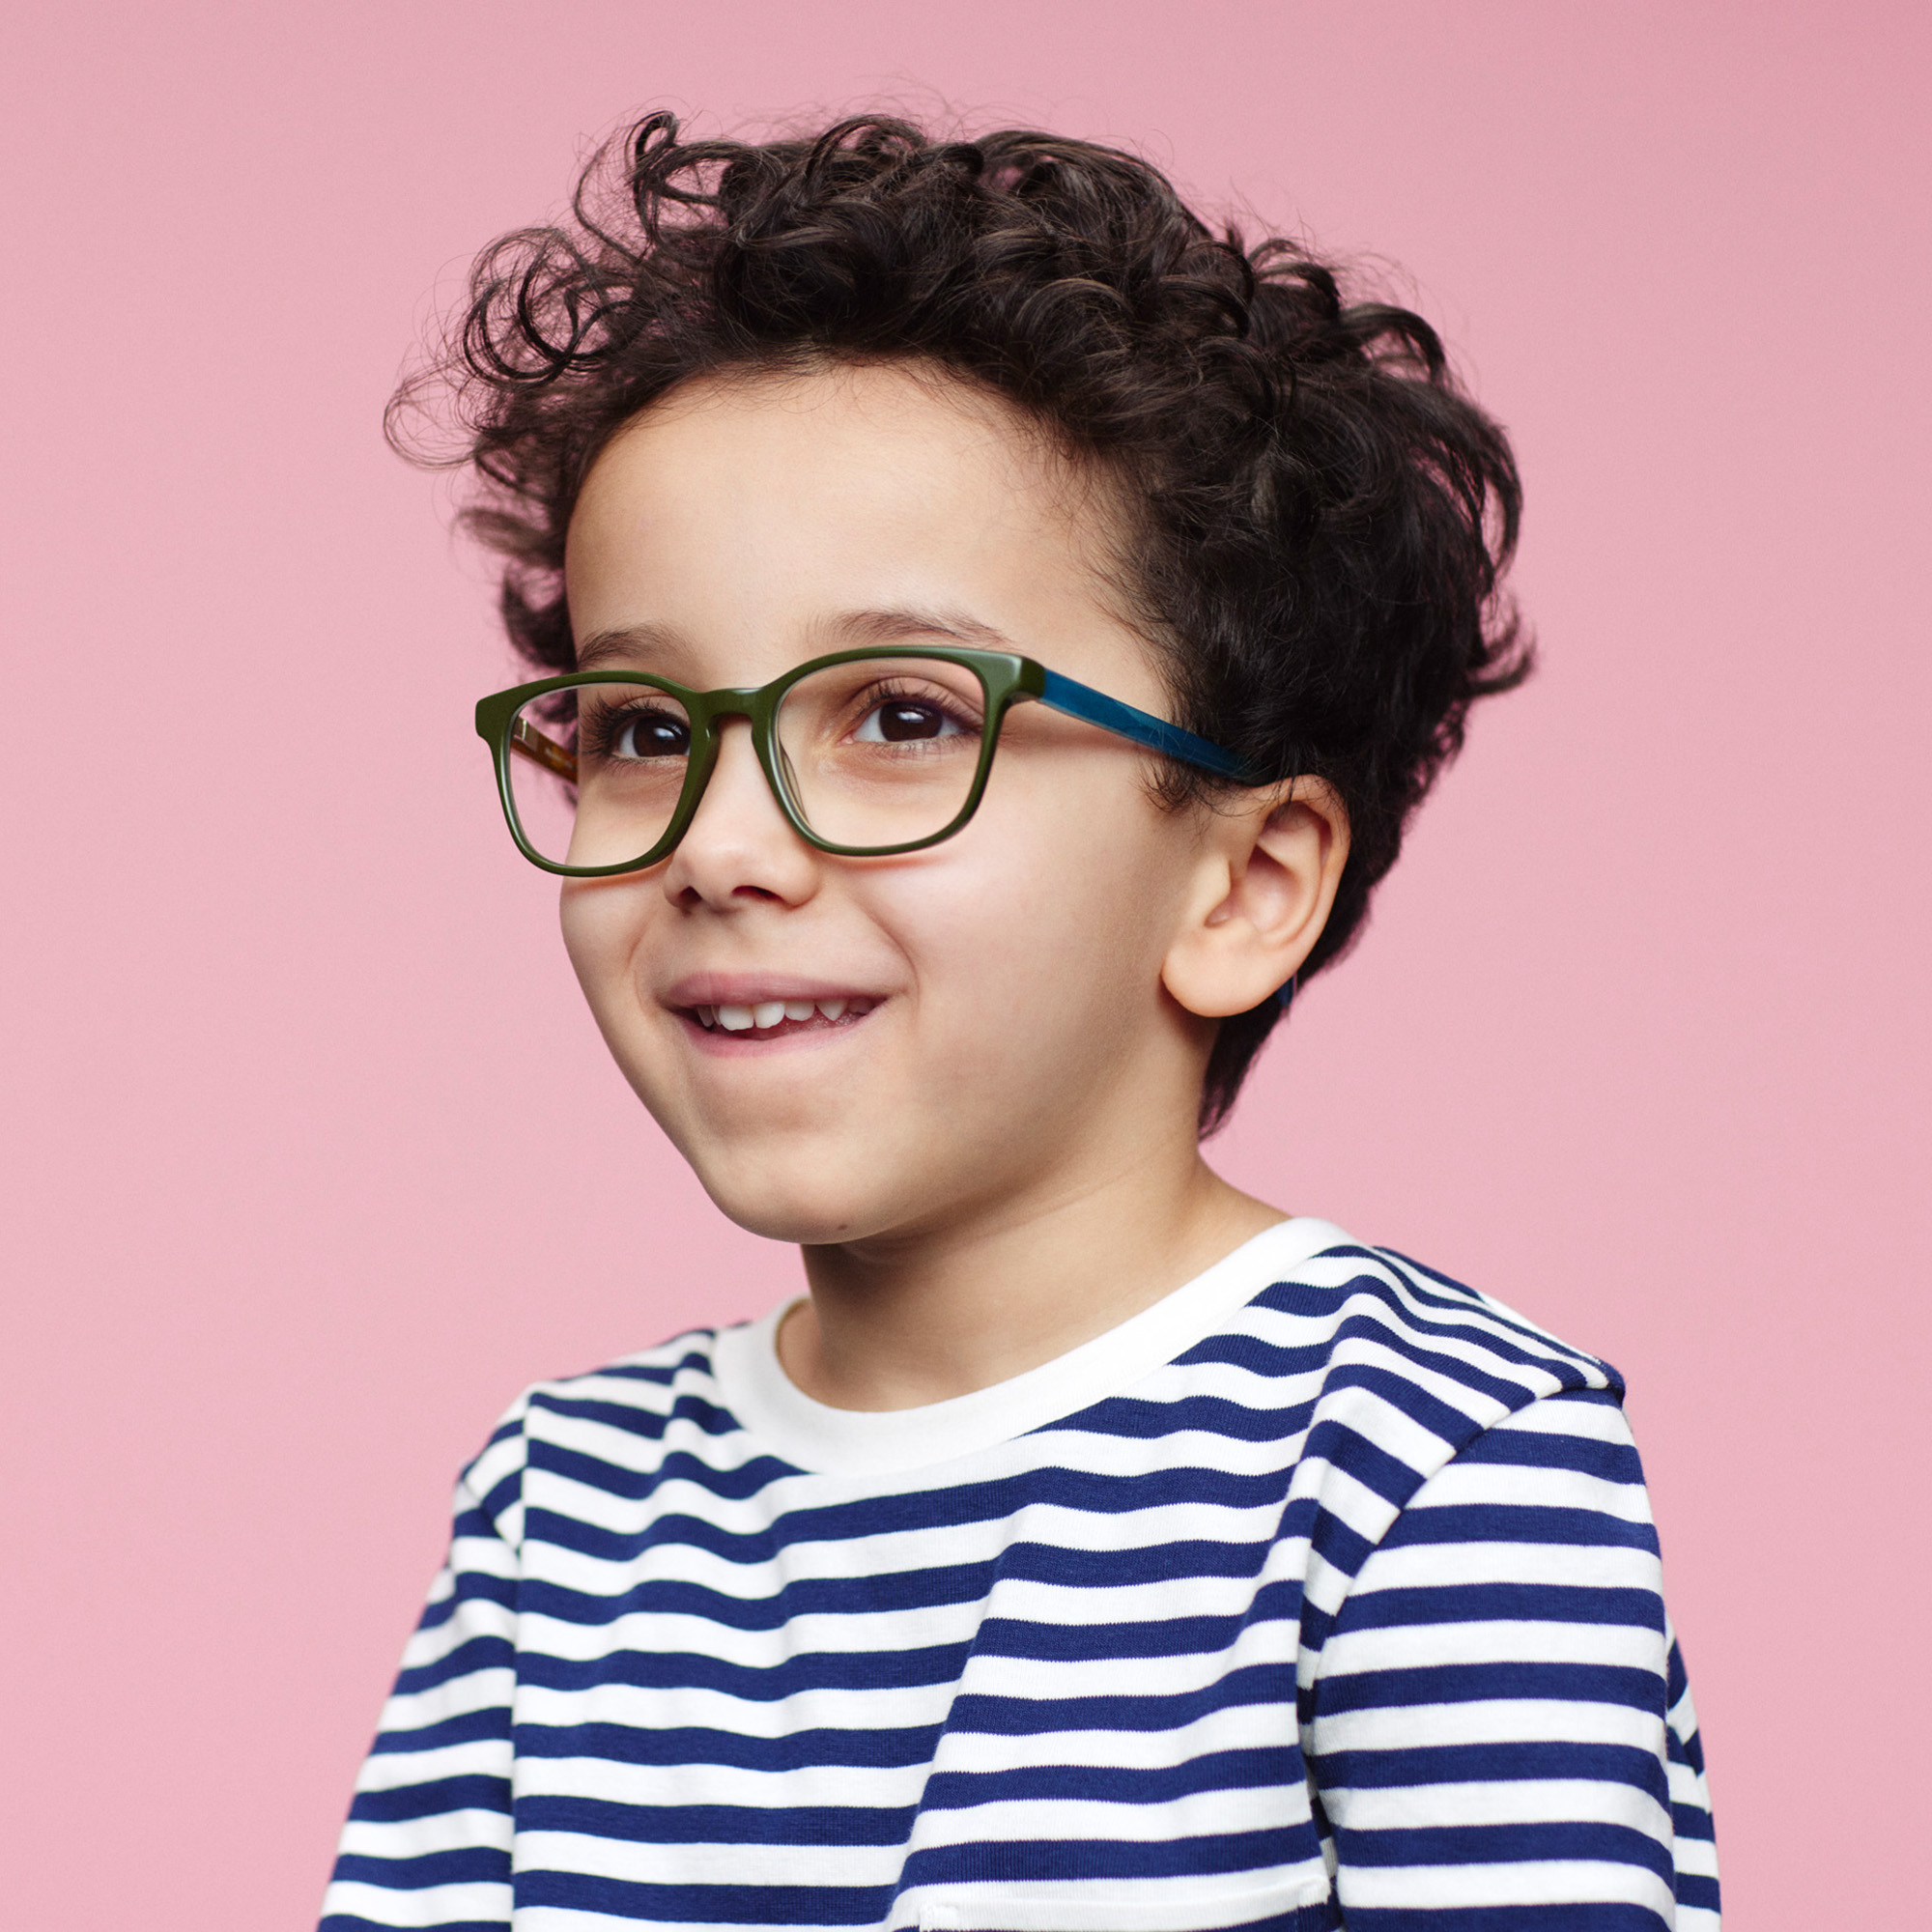 Kids & Teens Collection by Smarteyes